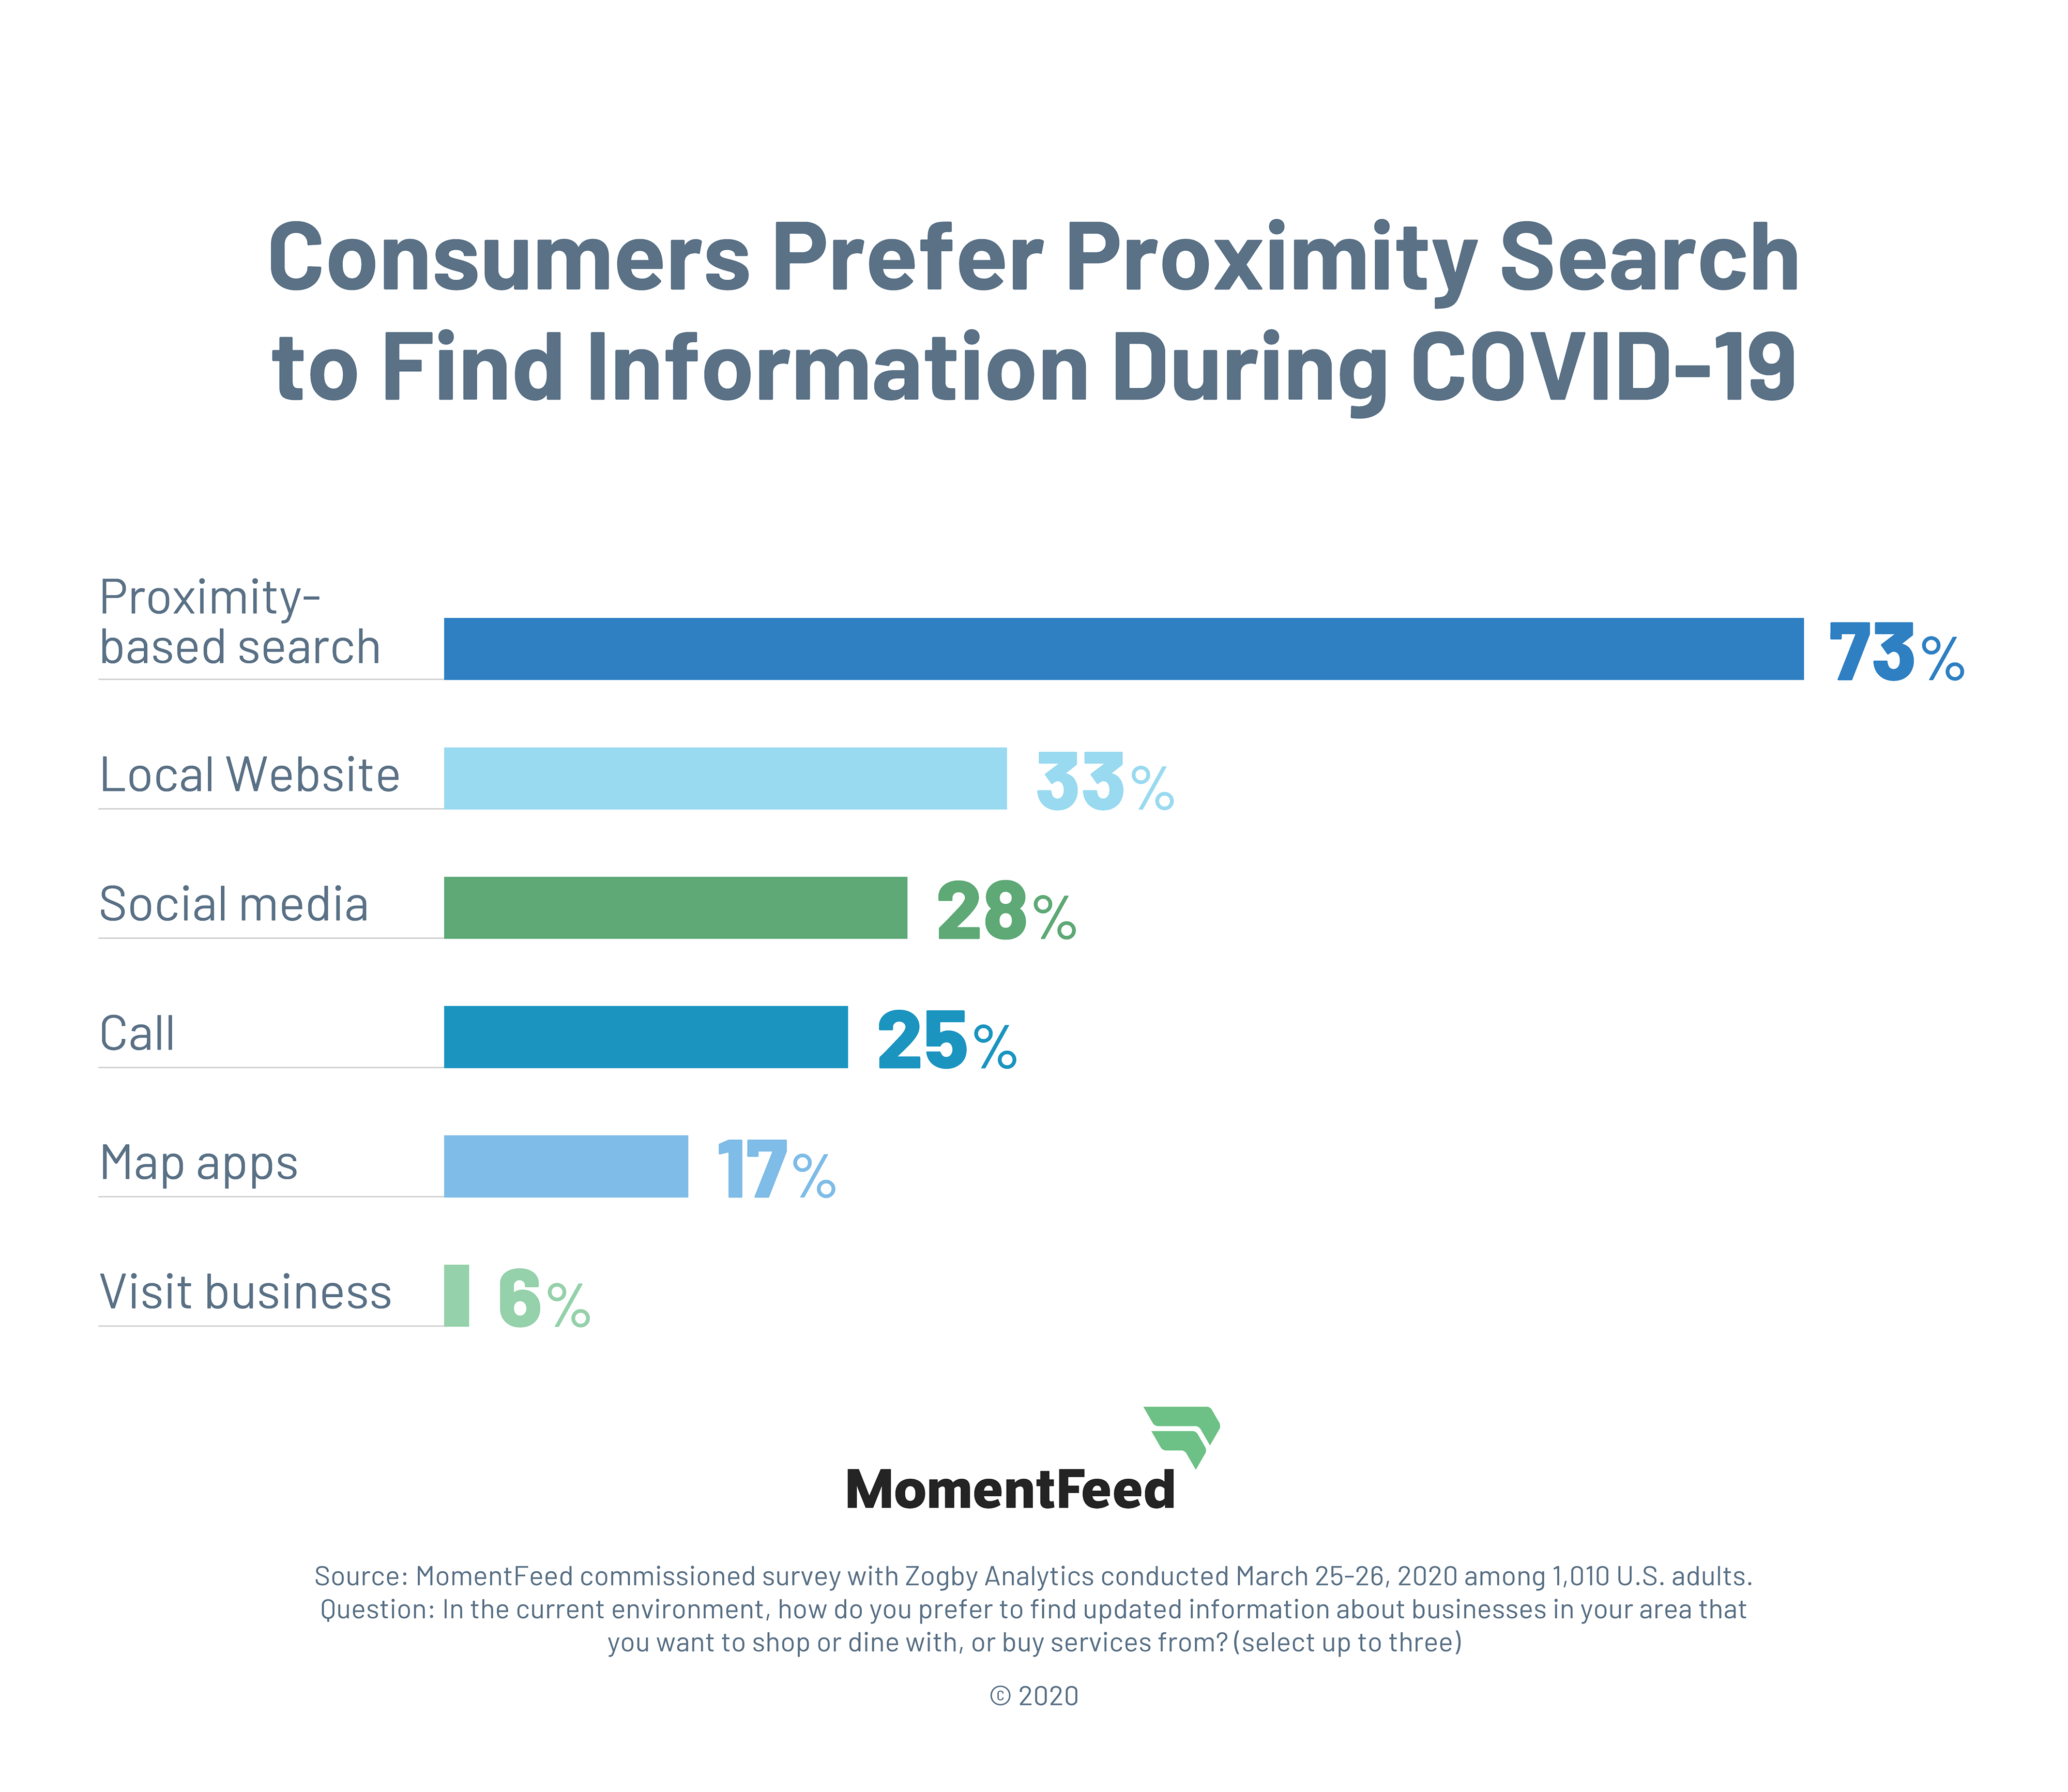 MomentFeed survey finds that 73% of consumers use proximity search to find local business information during COVID-19.